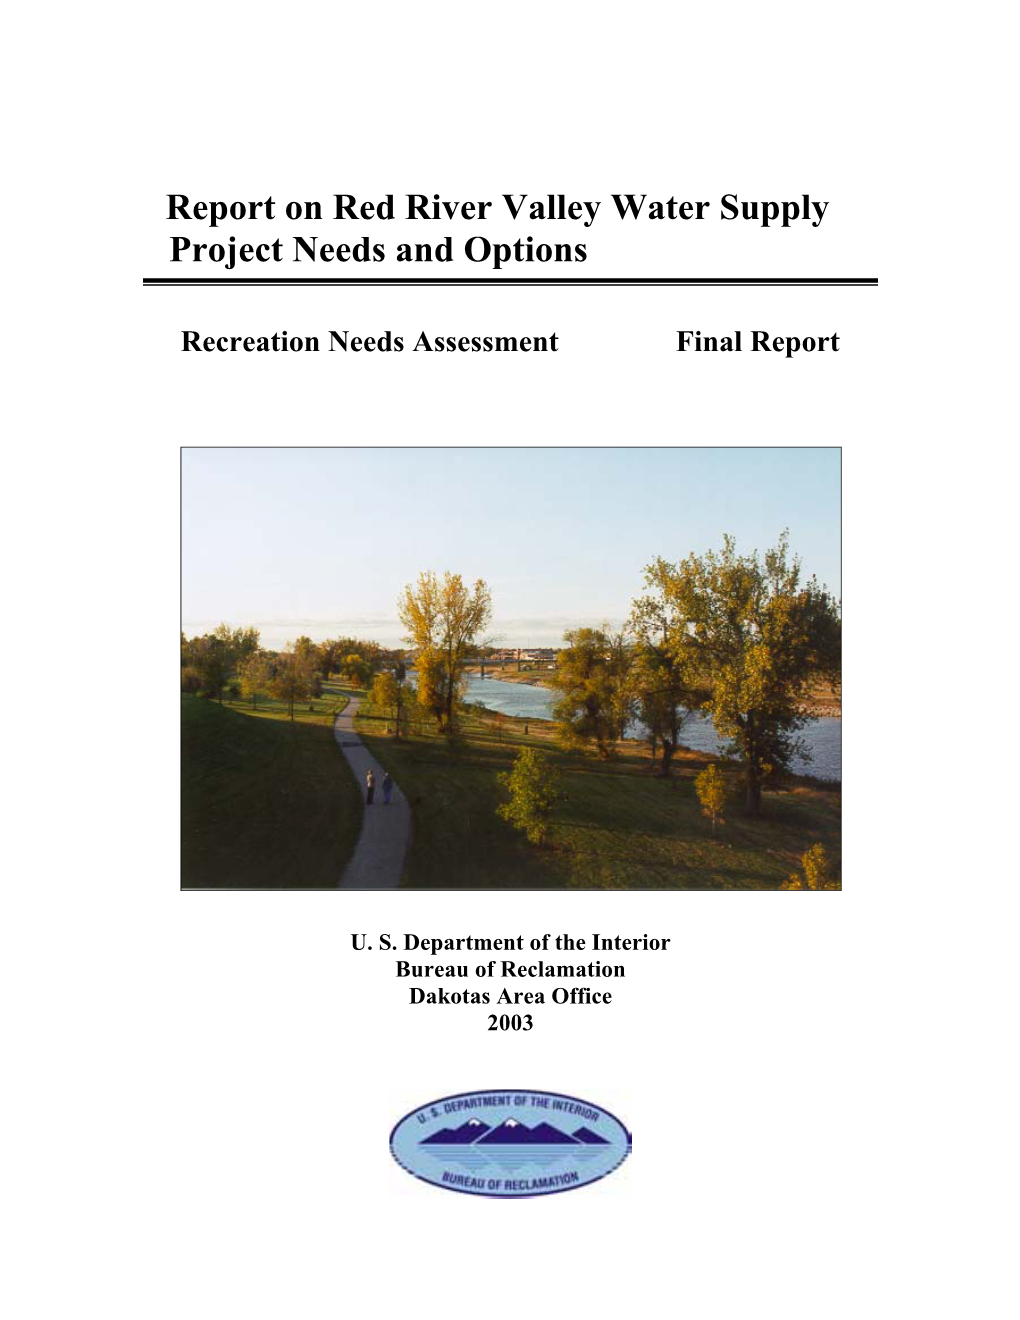 Report on Red River Valley Water Supply Project Needs and Options